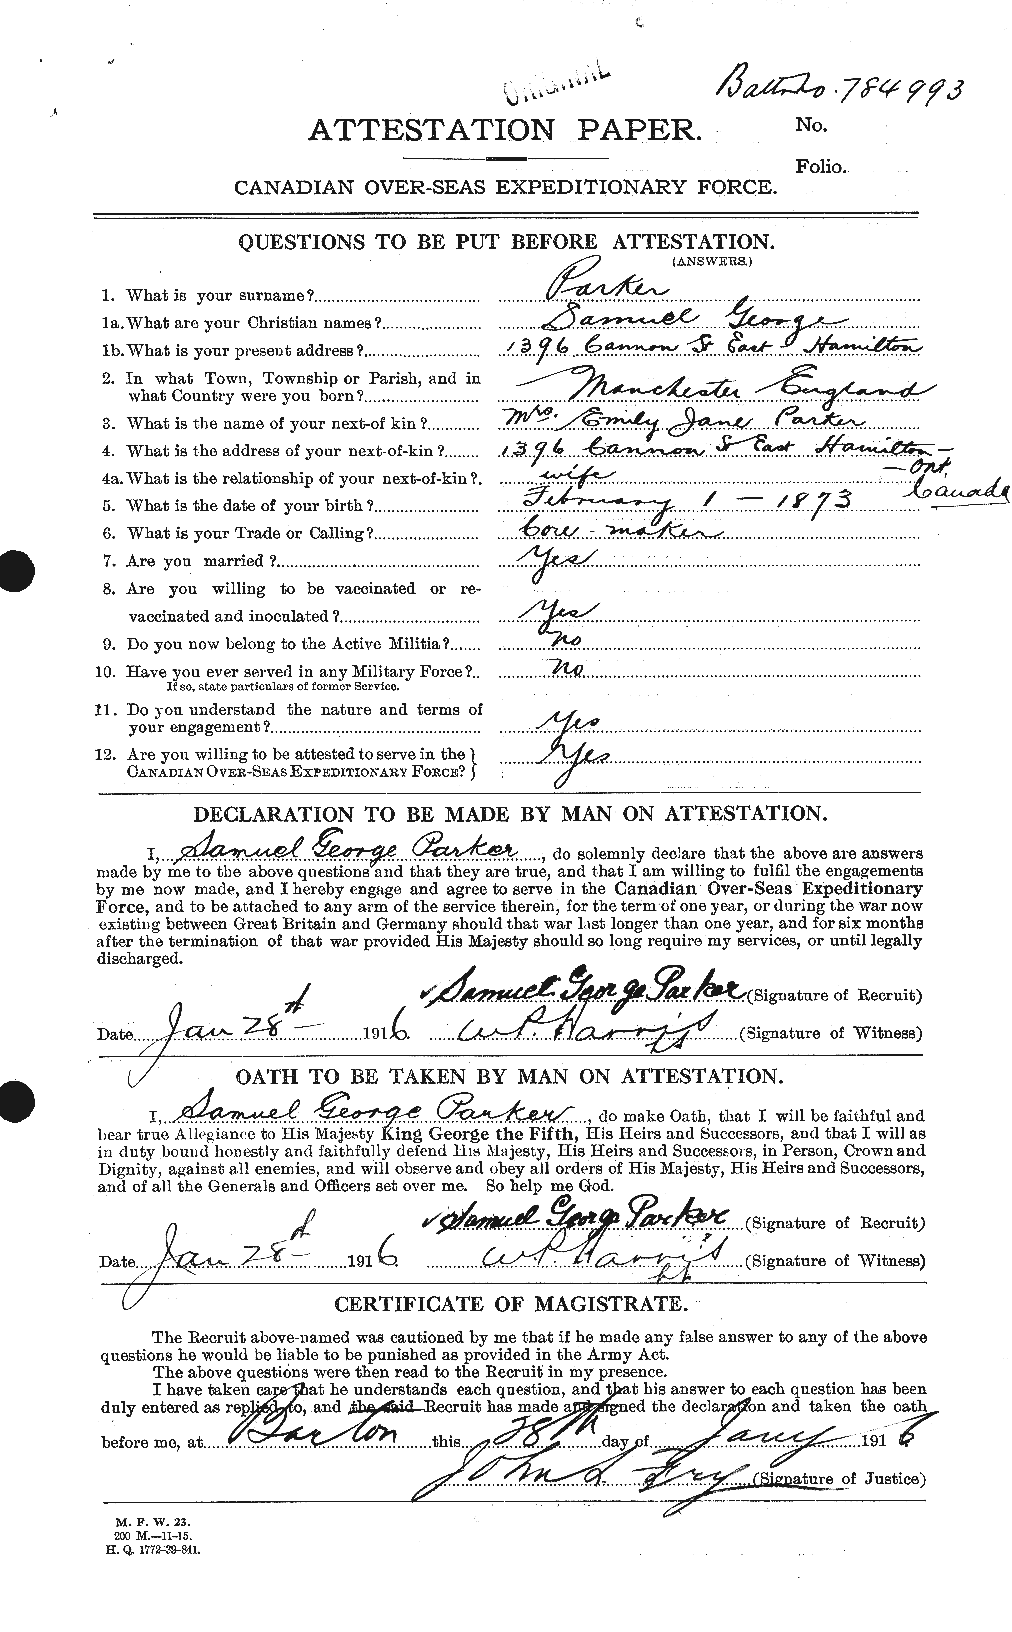 Personnel Records of the First World War - CEF 565624a